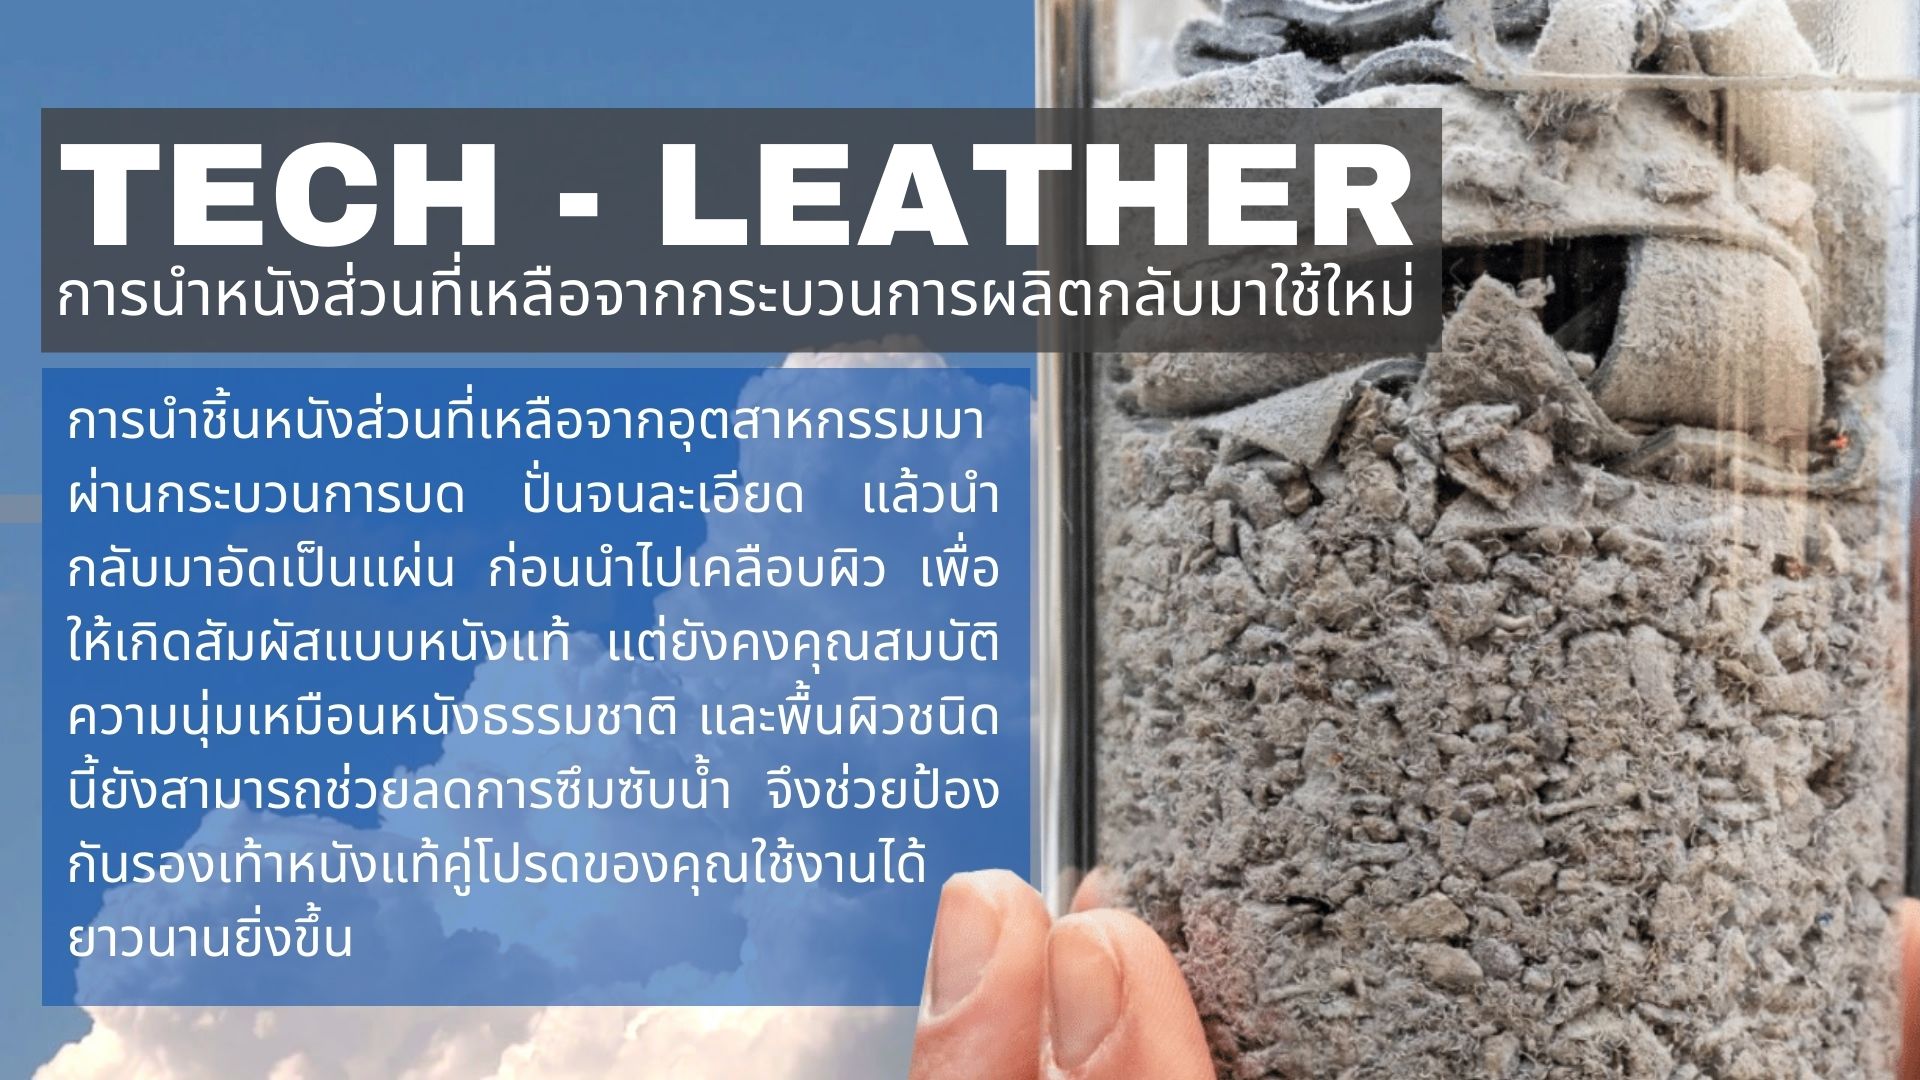 Tech-Leather